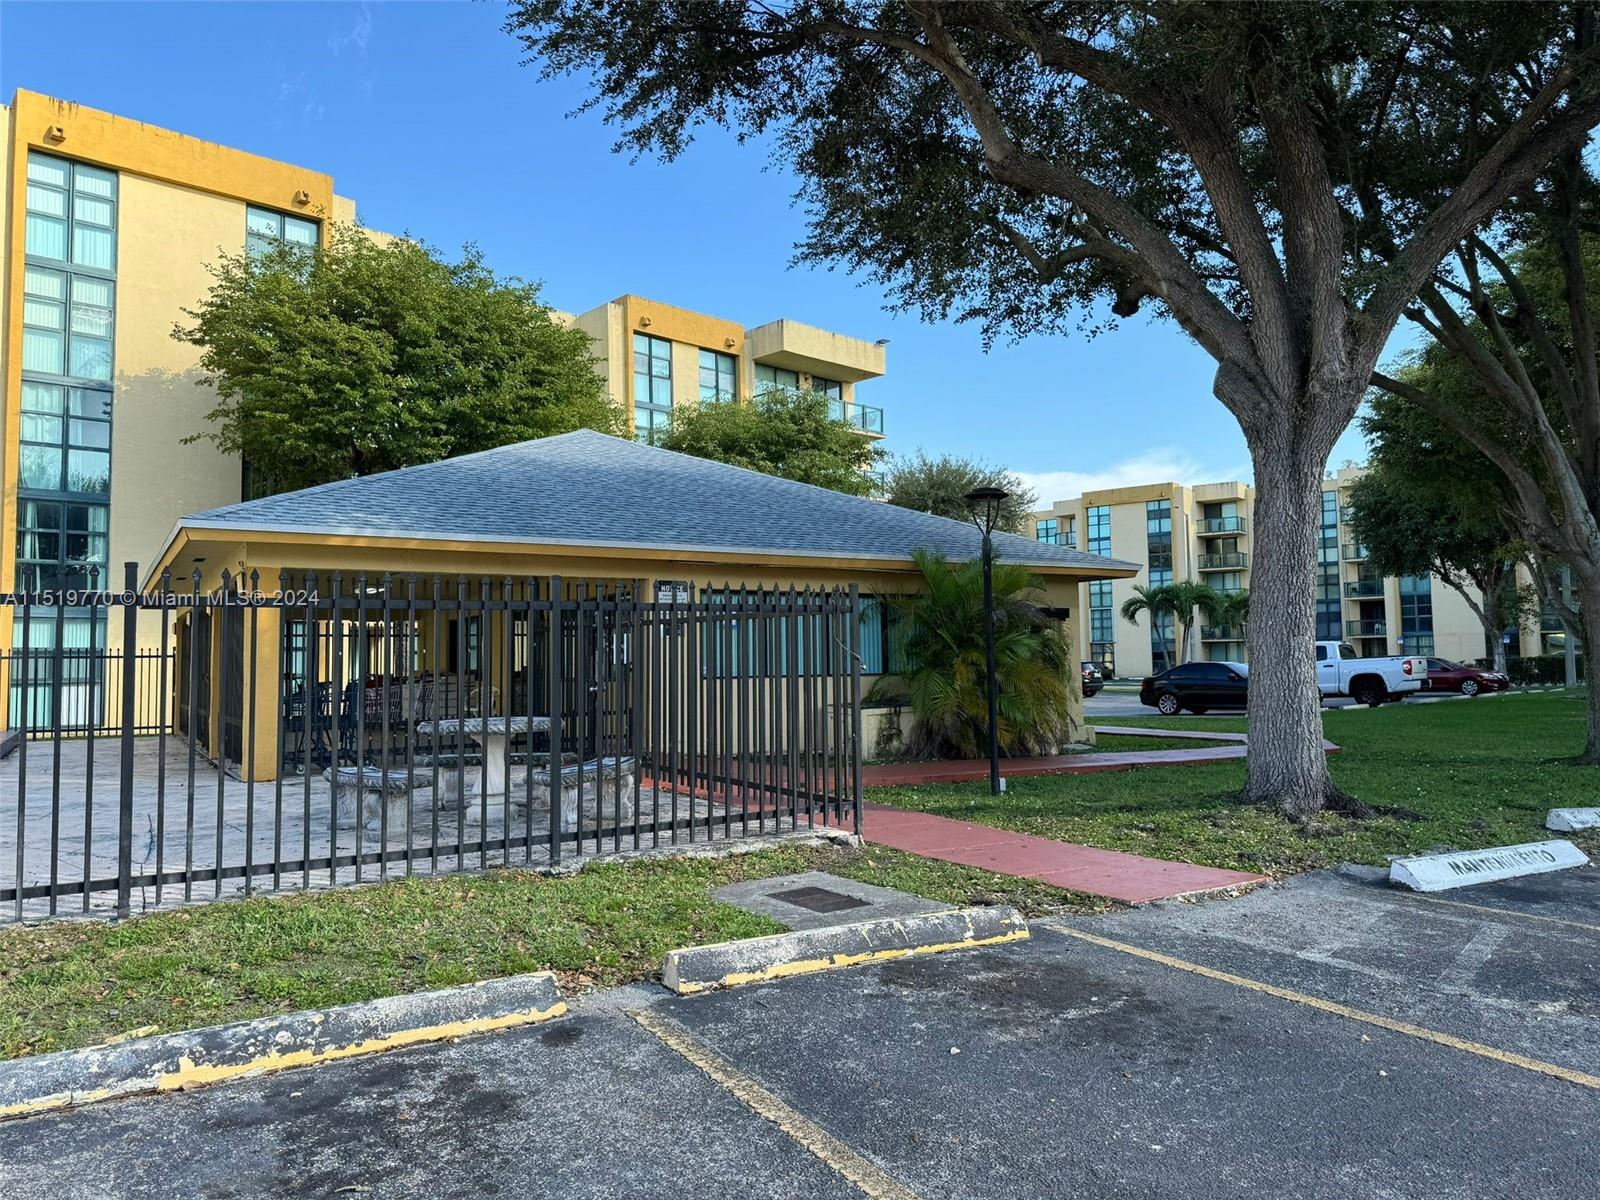 11800 SW 18th St 201-4, Miami, Florida 33175, 1 Bedroom Bedrooms, ,1 BathroomBathrooms,Residential,For Sale,11800 SW 18th St 201-4,A11519770